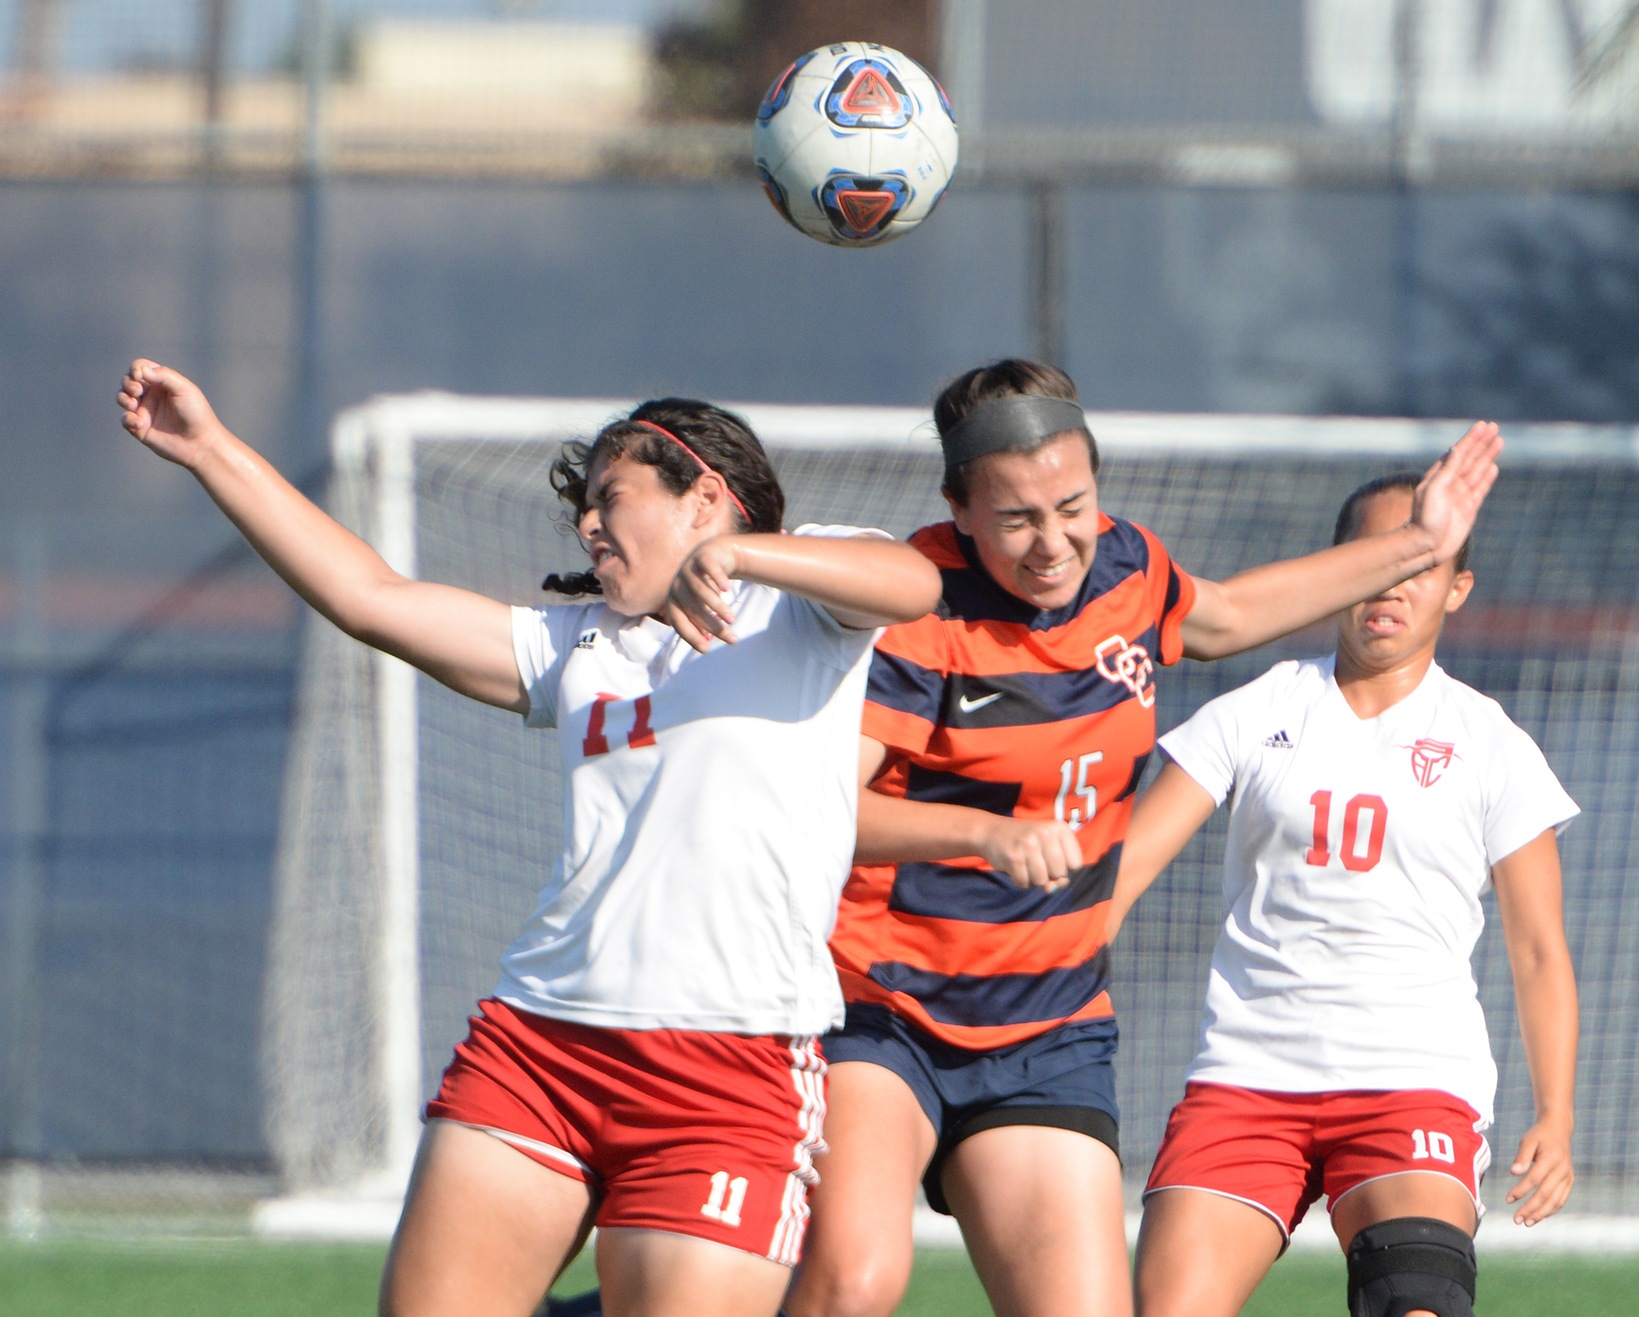 Late goal propels Pirates past Mustangs, 1-0